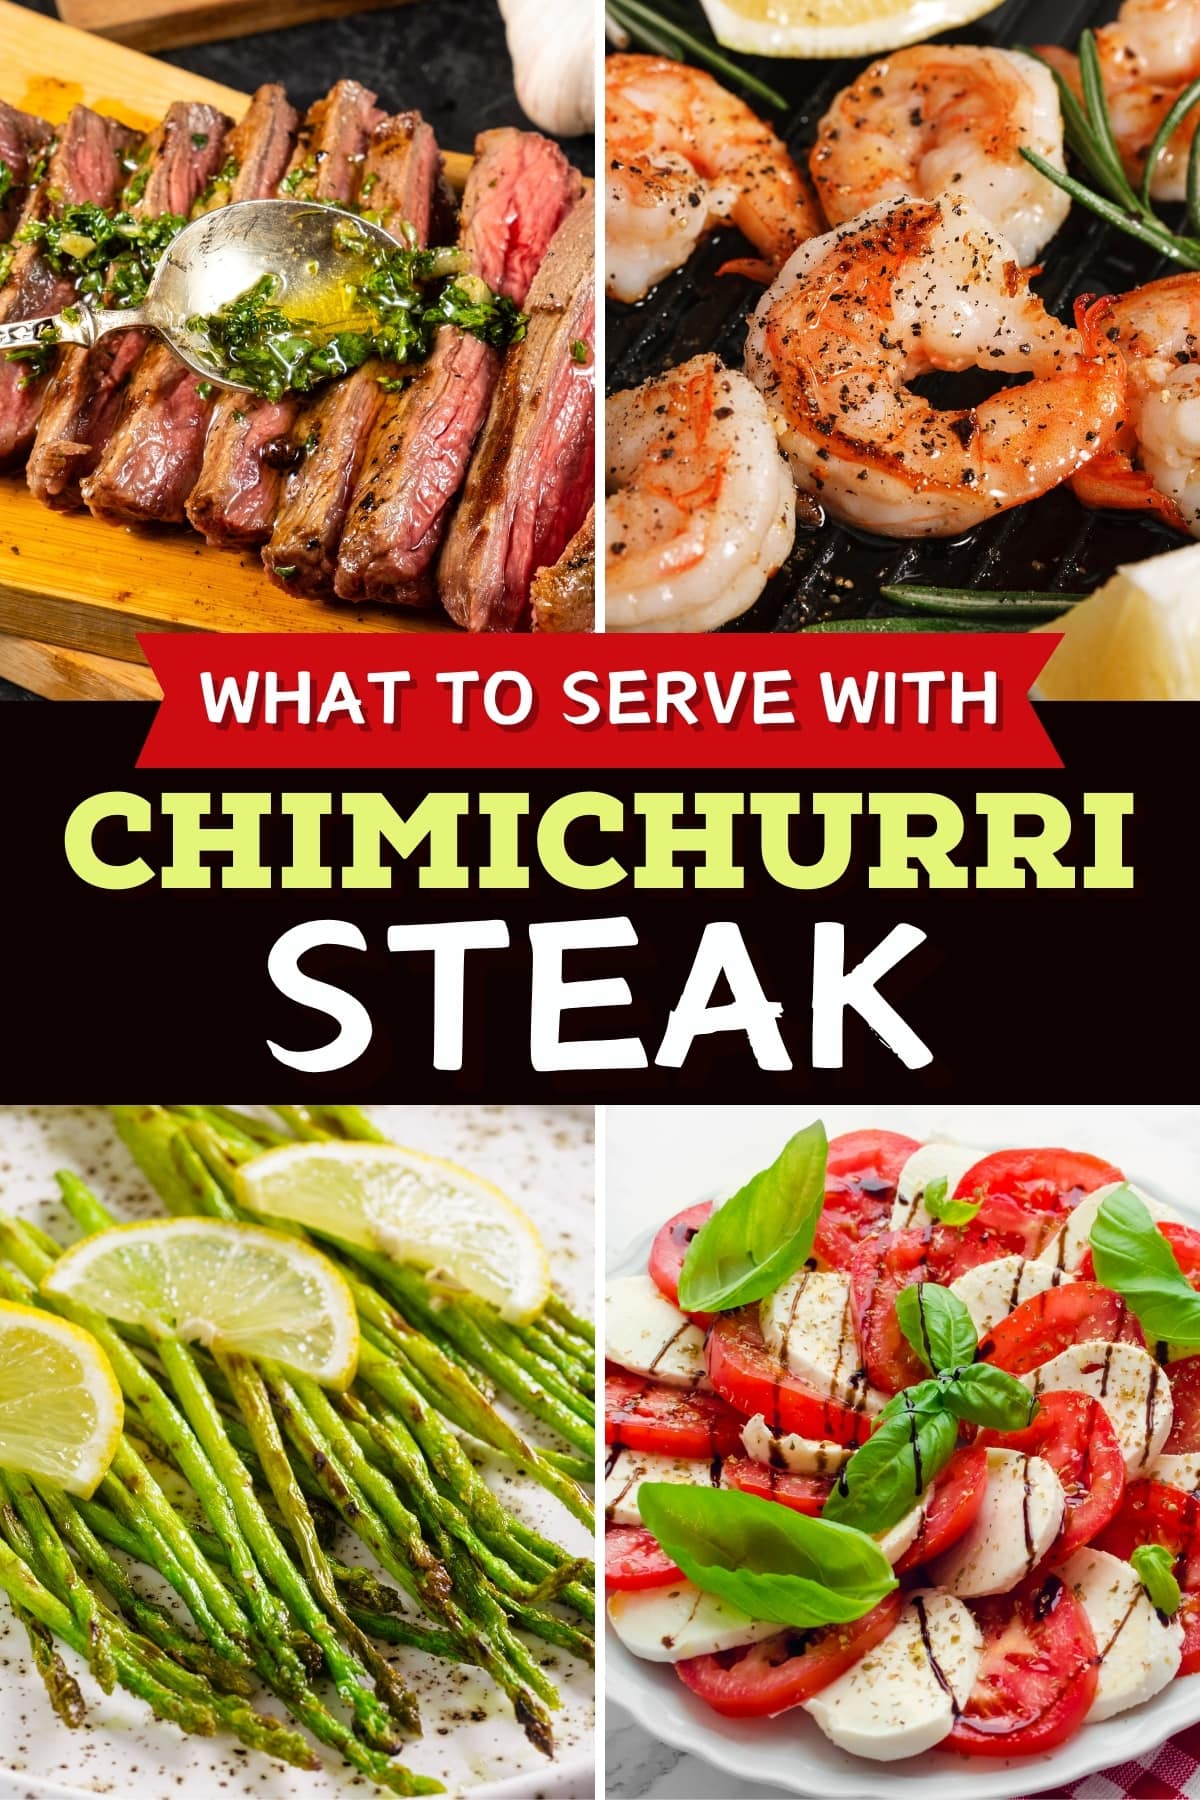 What to Serve with Chimichurri Steak